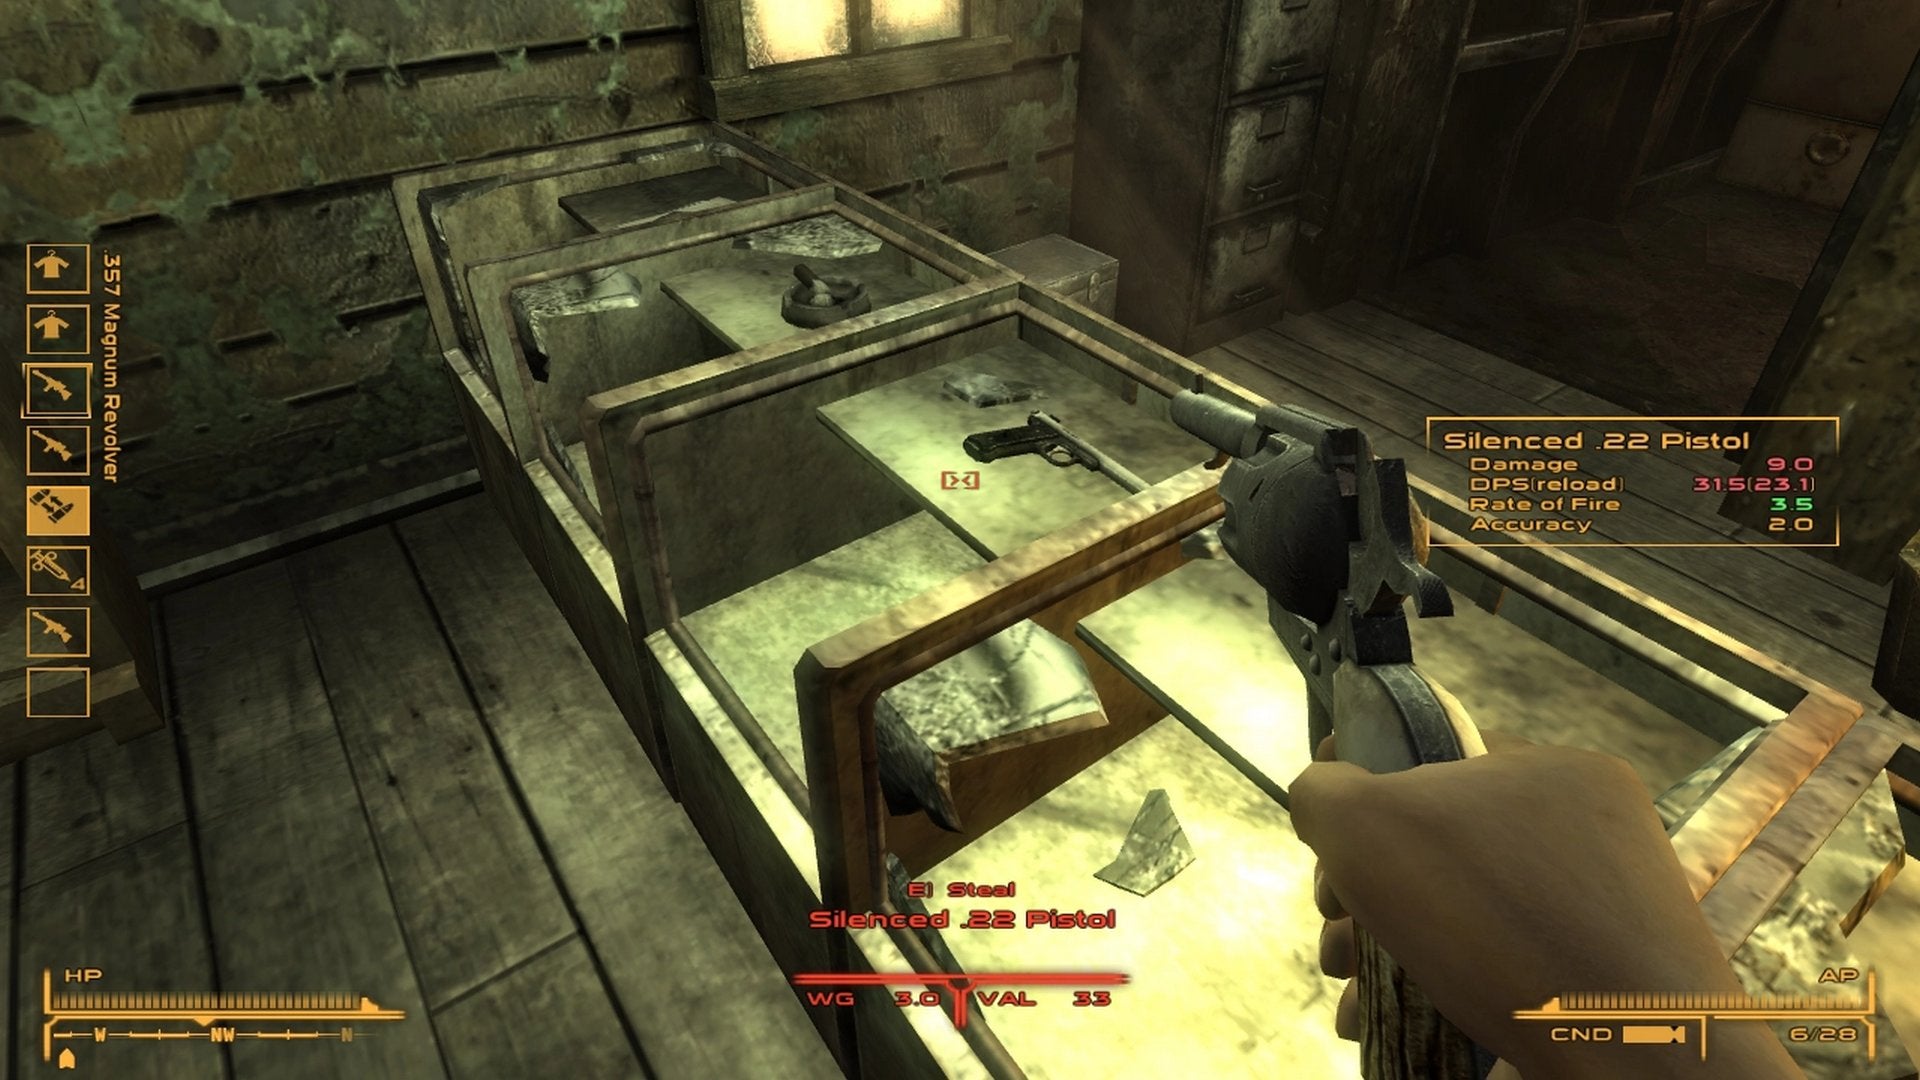 A gun is being pointed at a table full of other guns in the FPS Weapon Wheel mod for Fallout: New Vegas